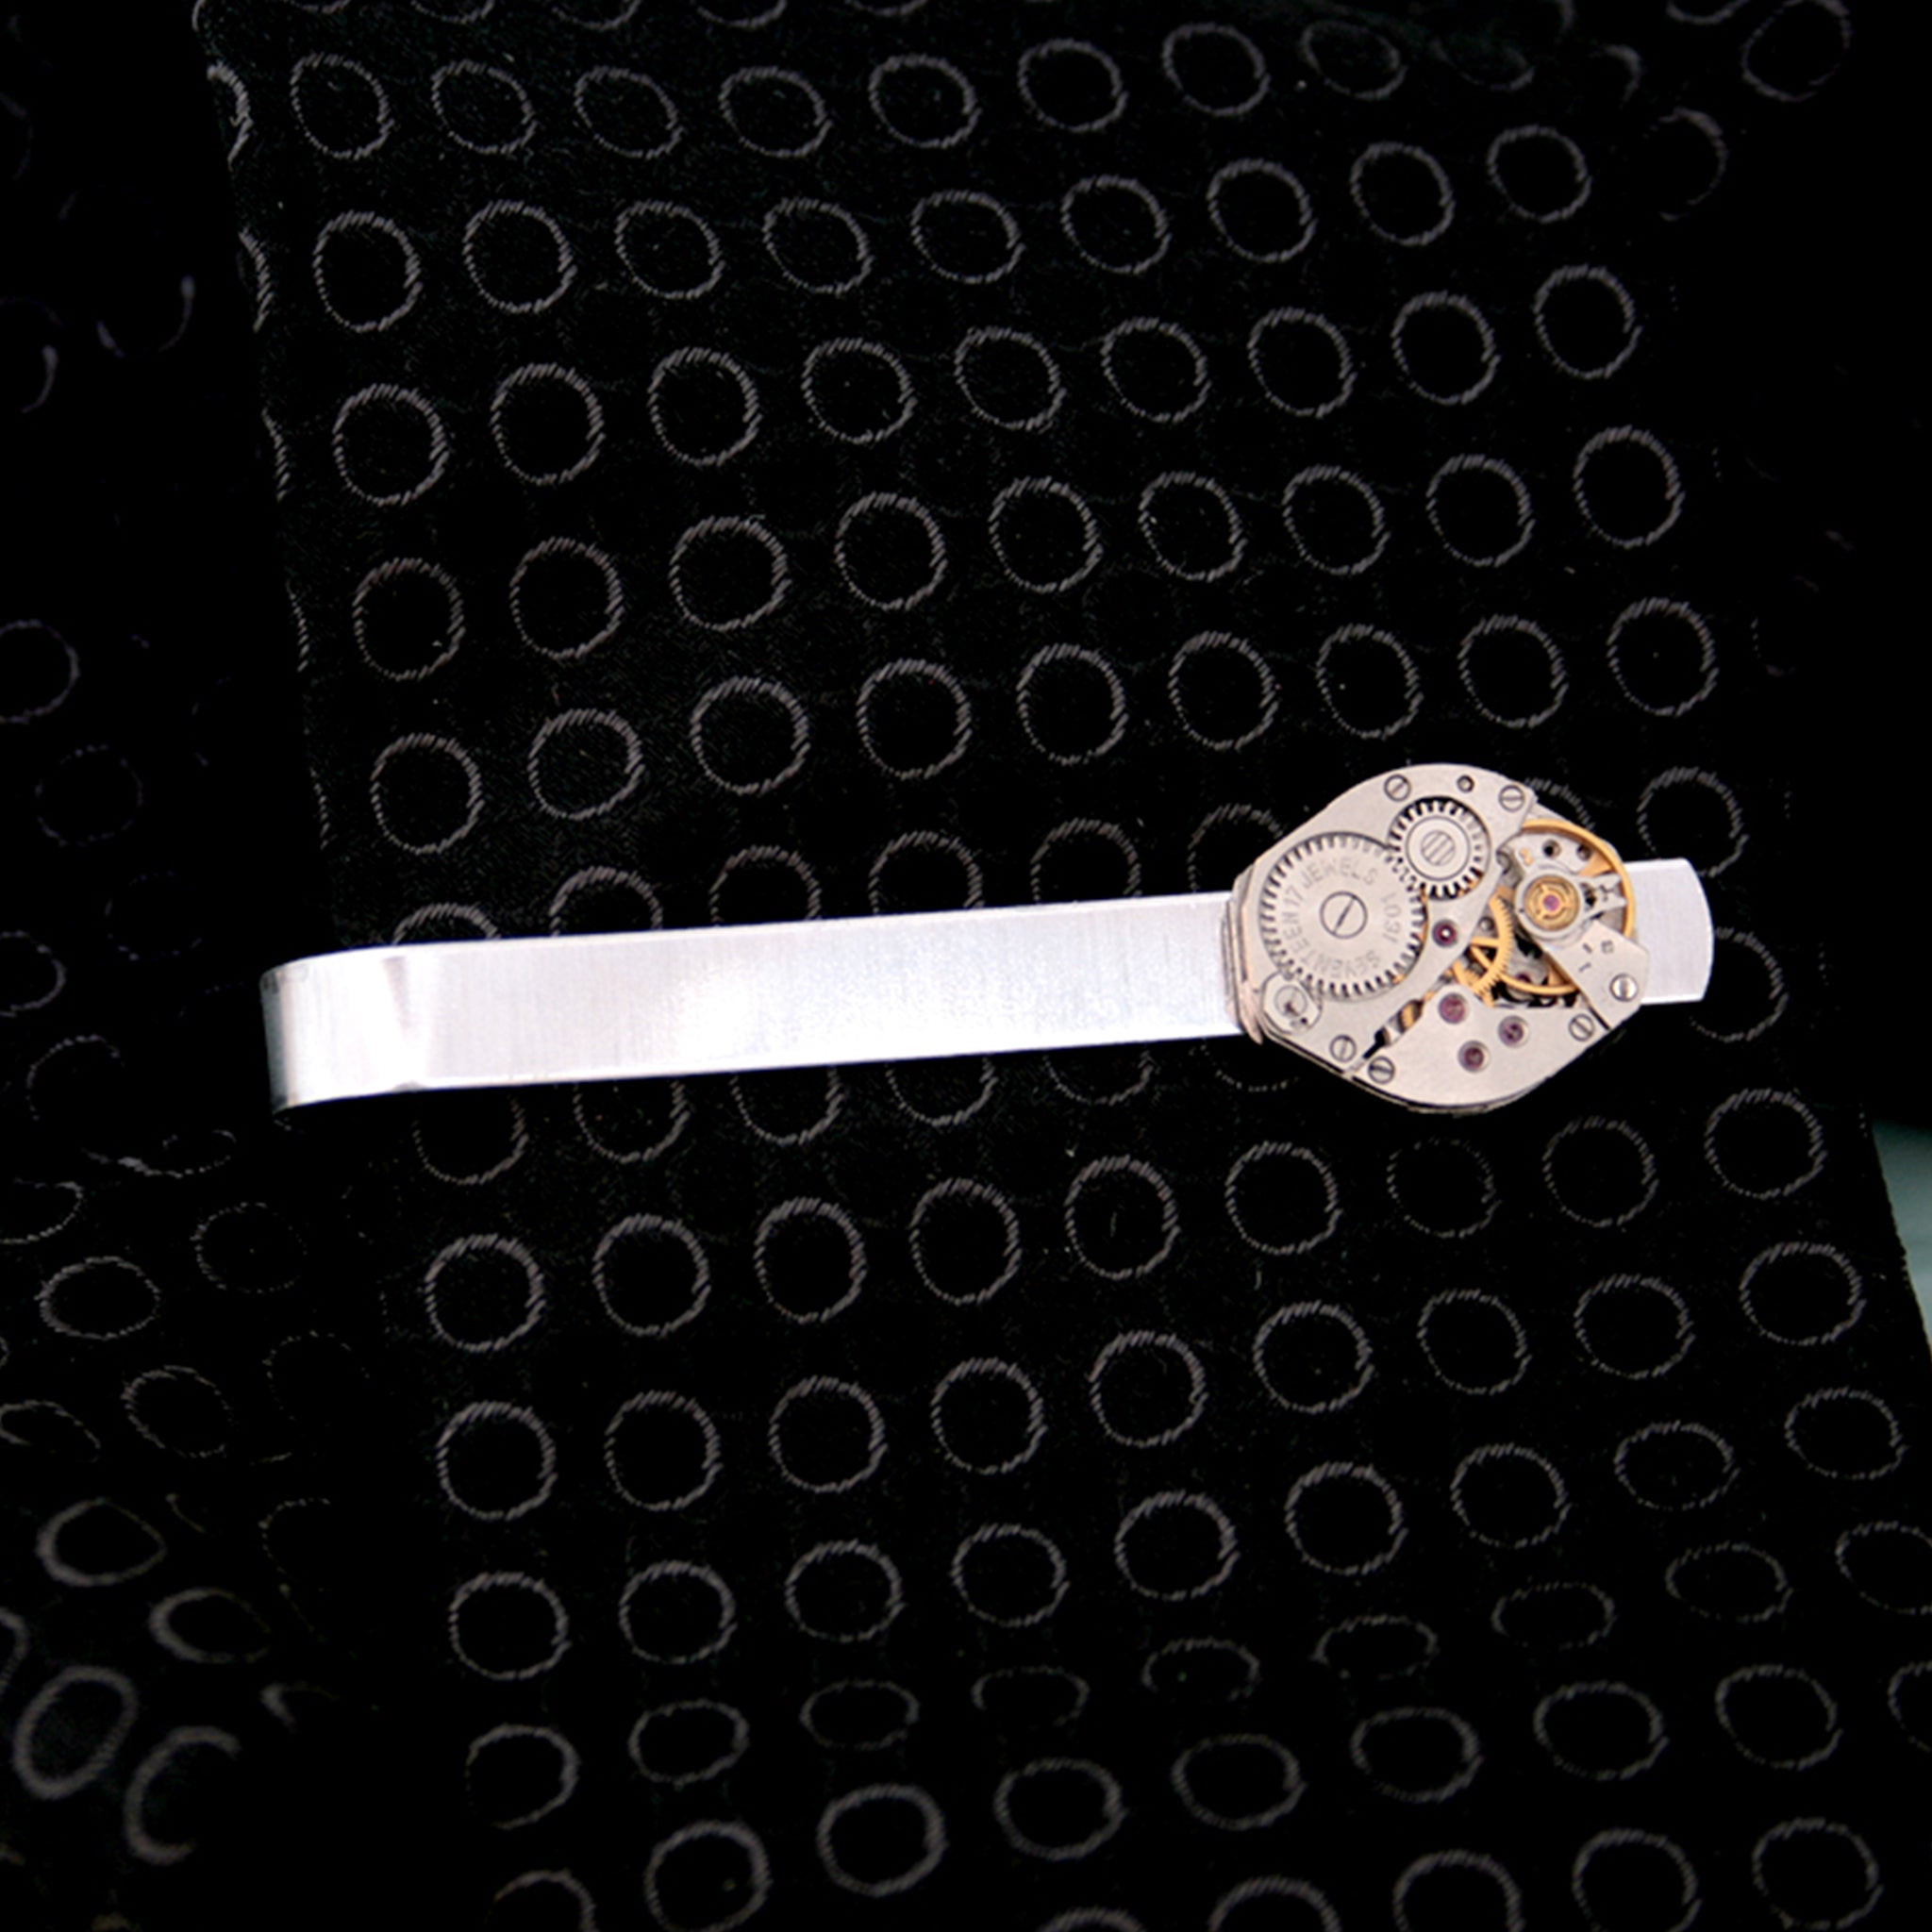 Steam punk tie clip made of real watch on a tie